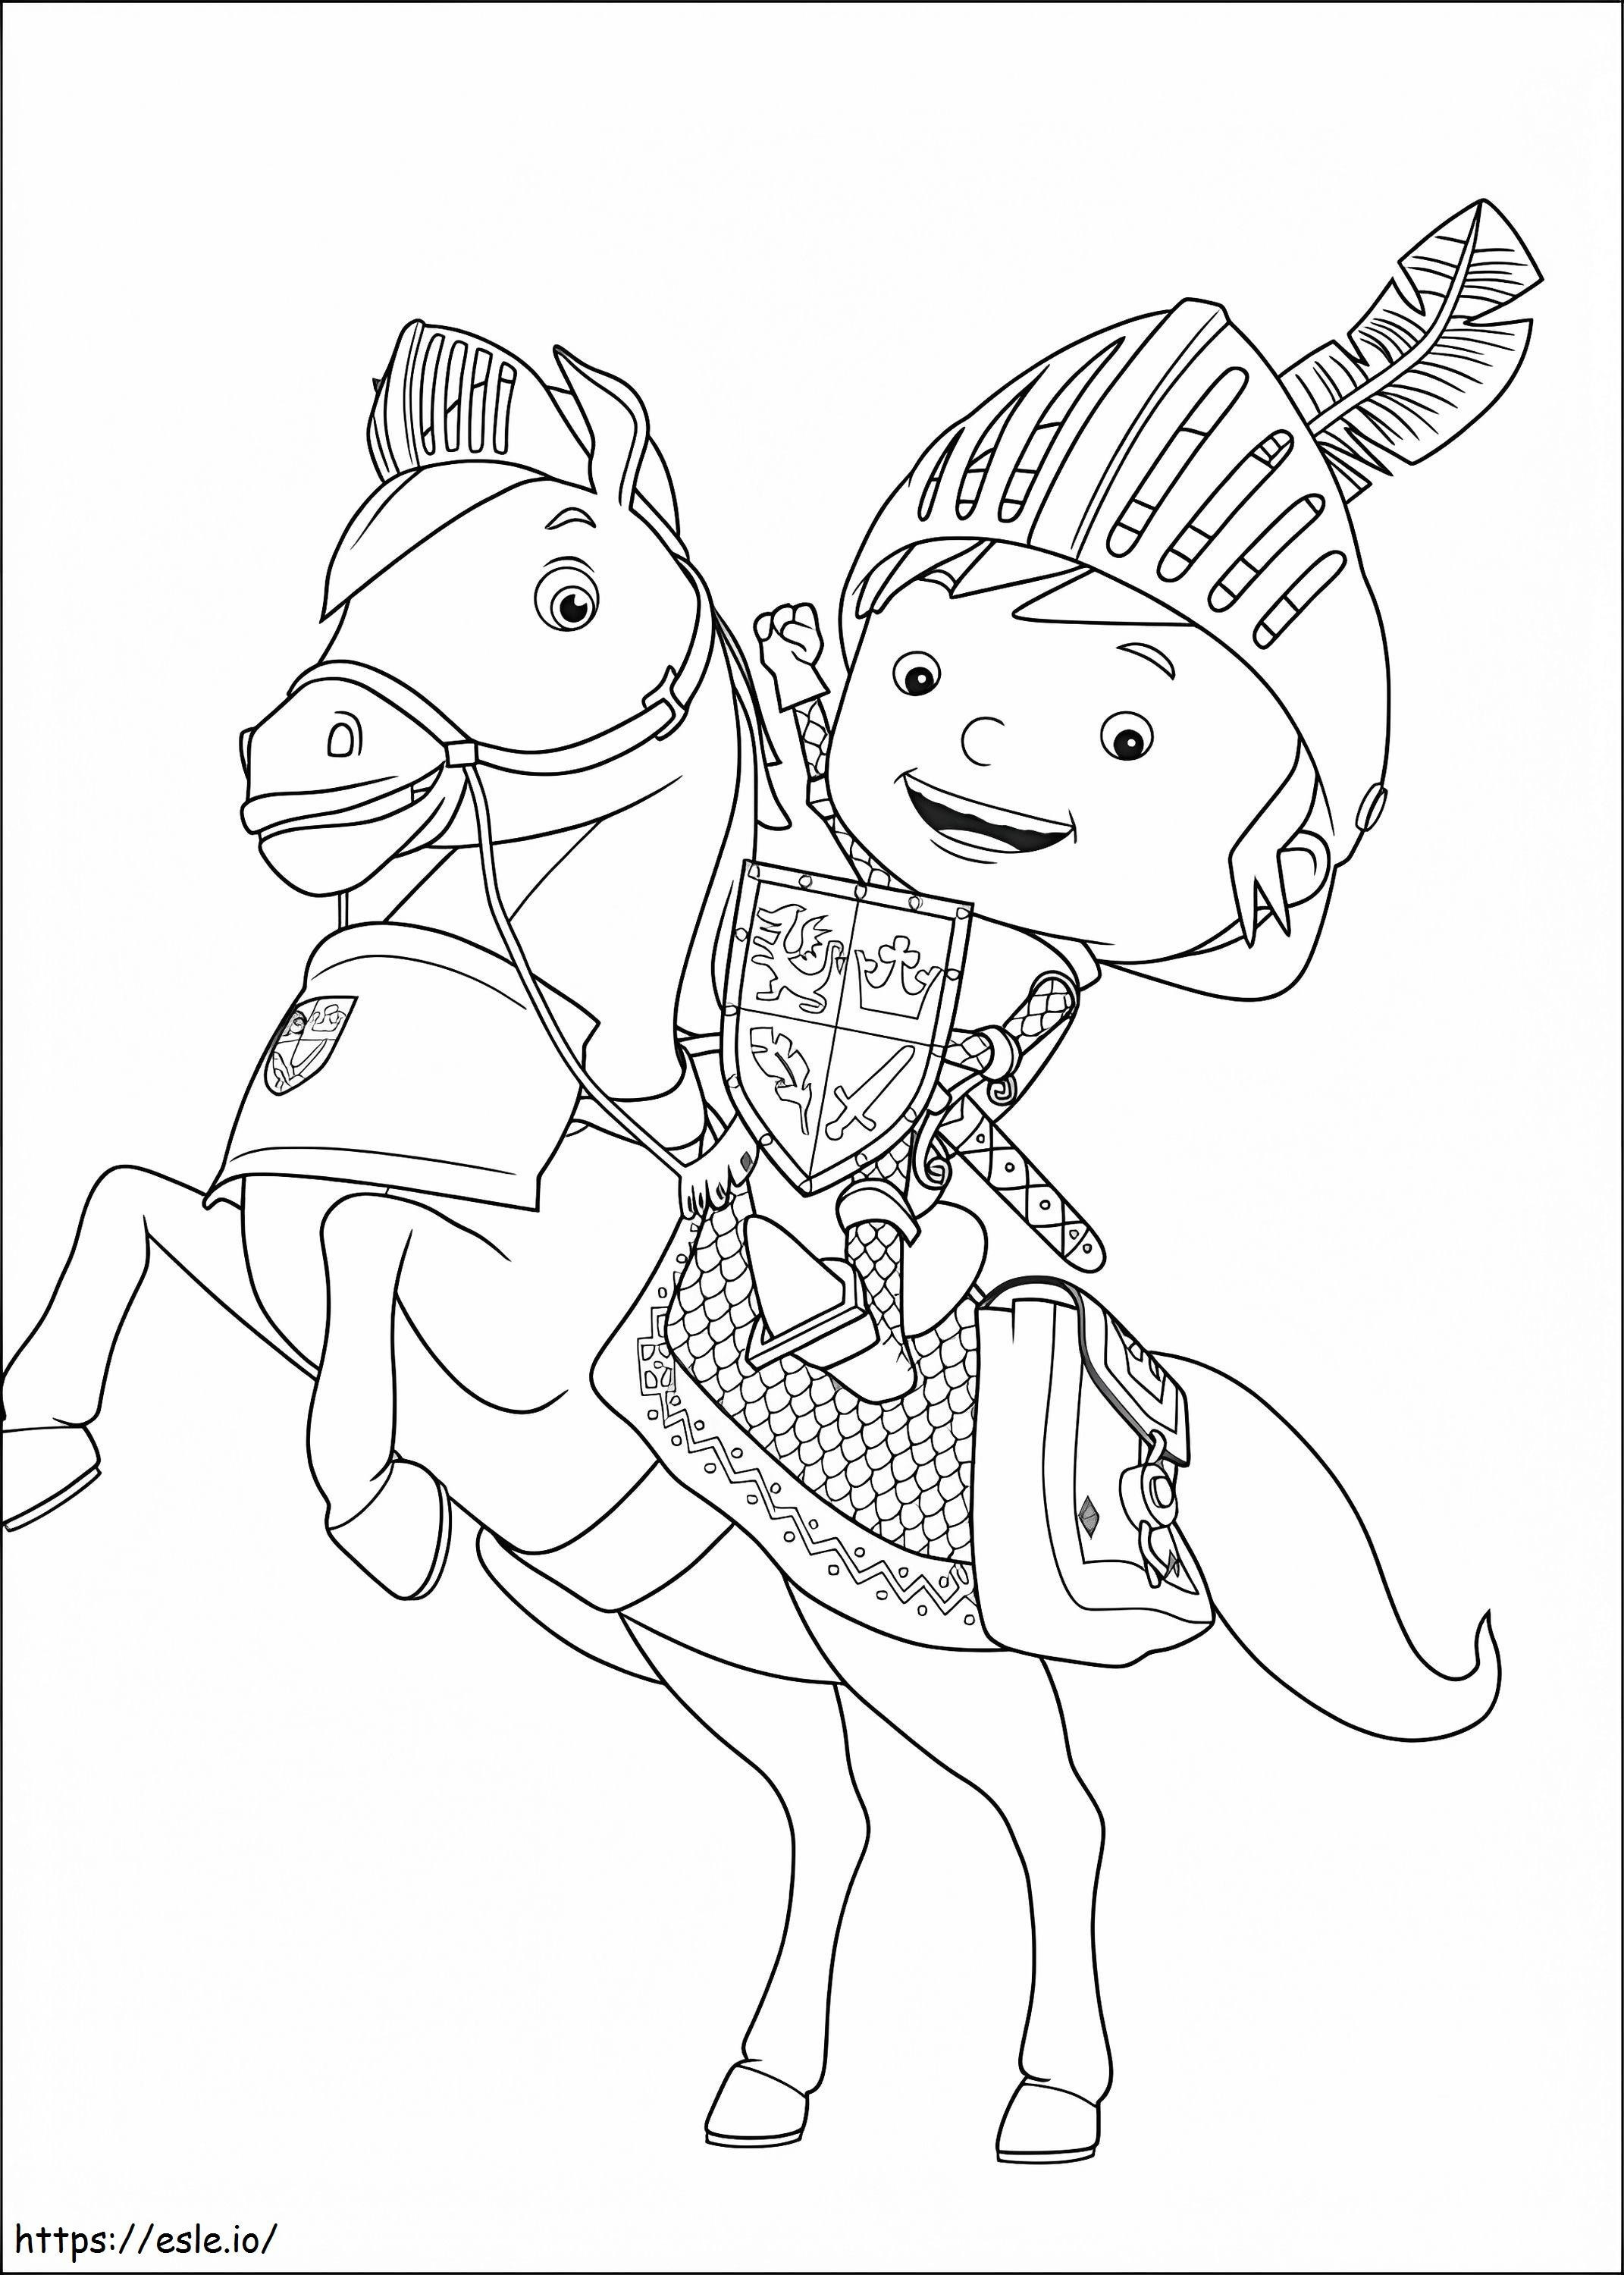 Mike The Knight On Horseback coloring page